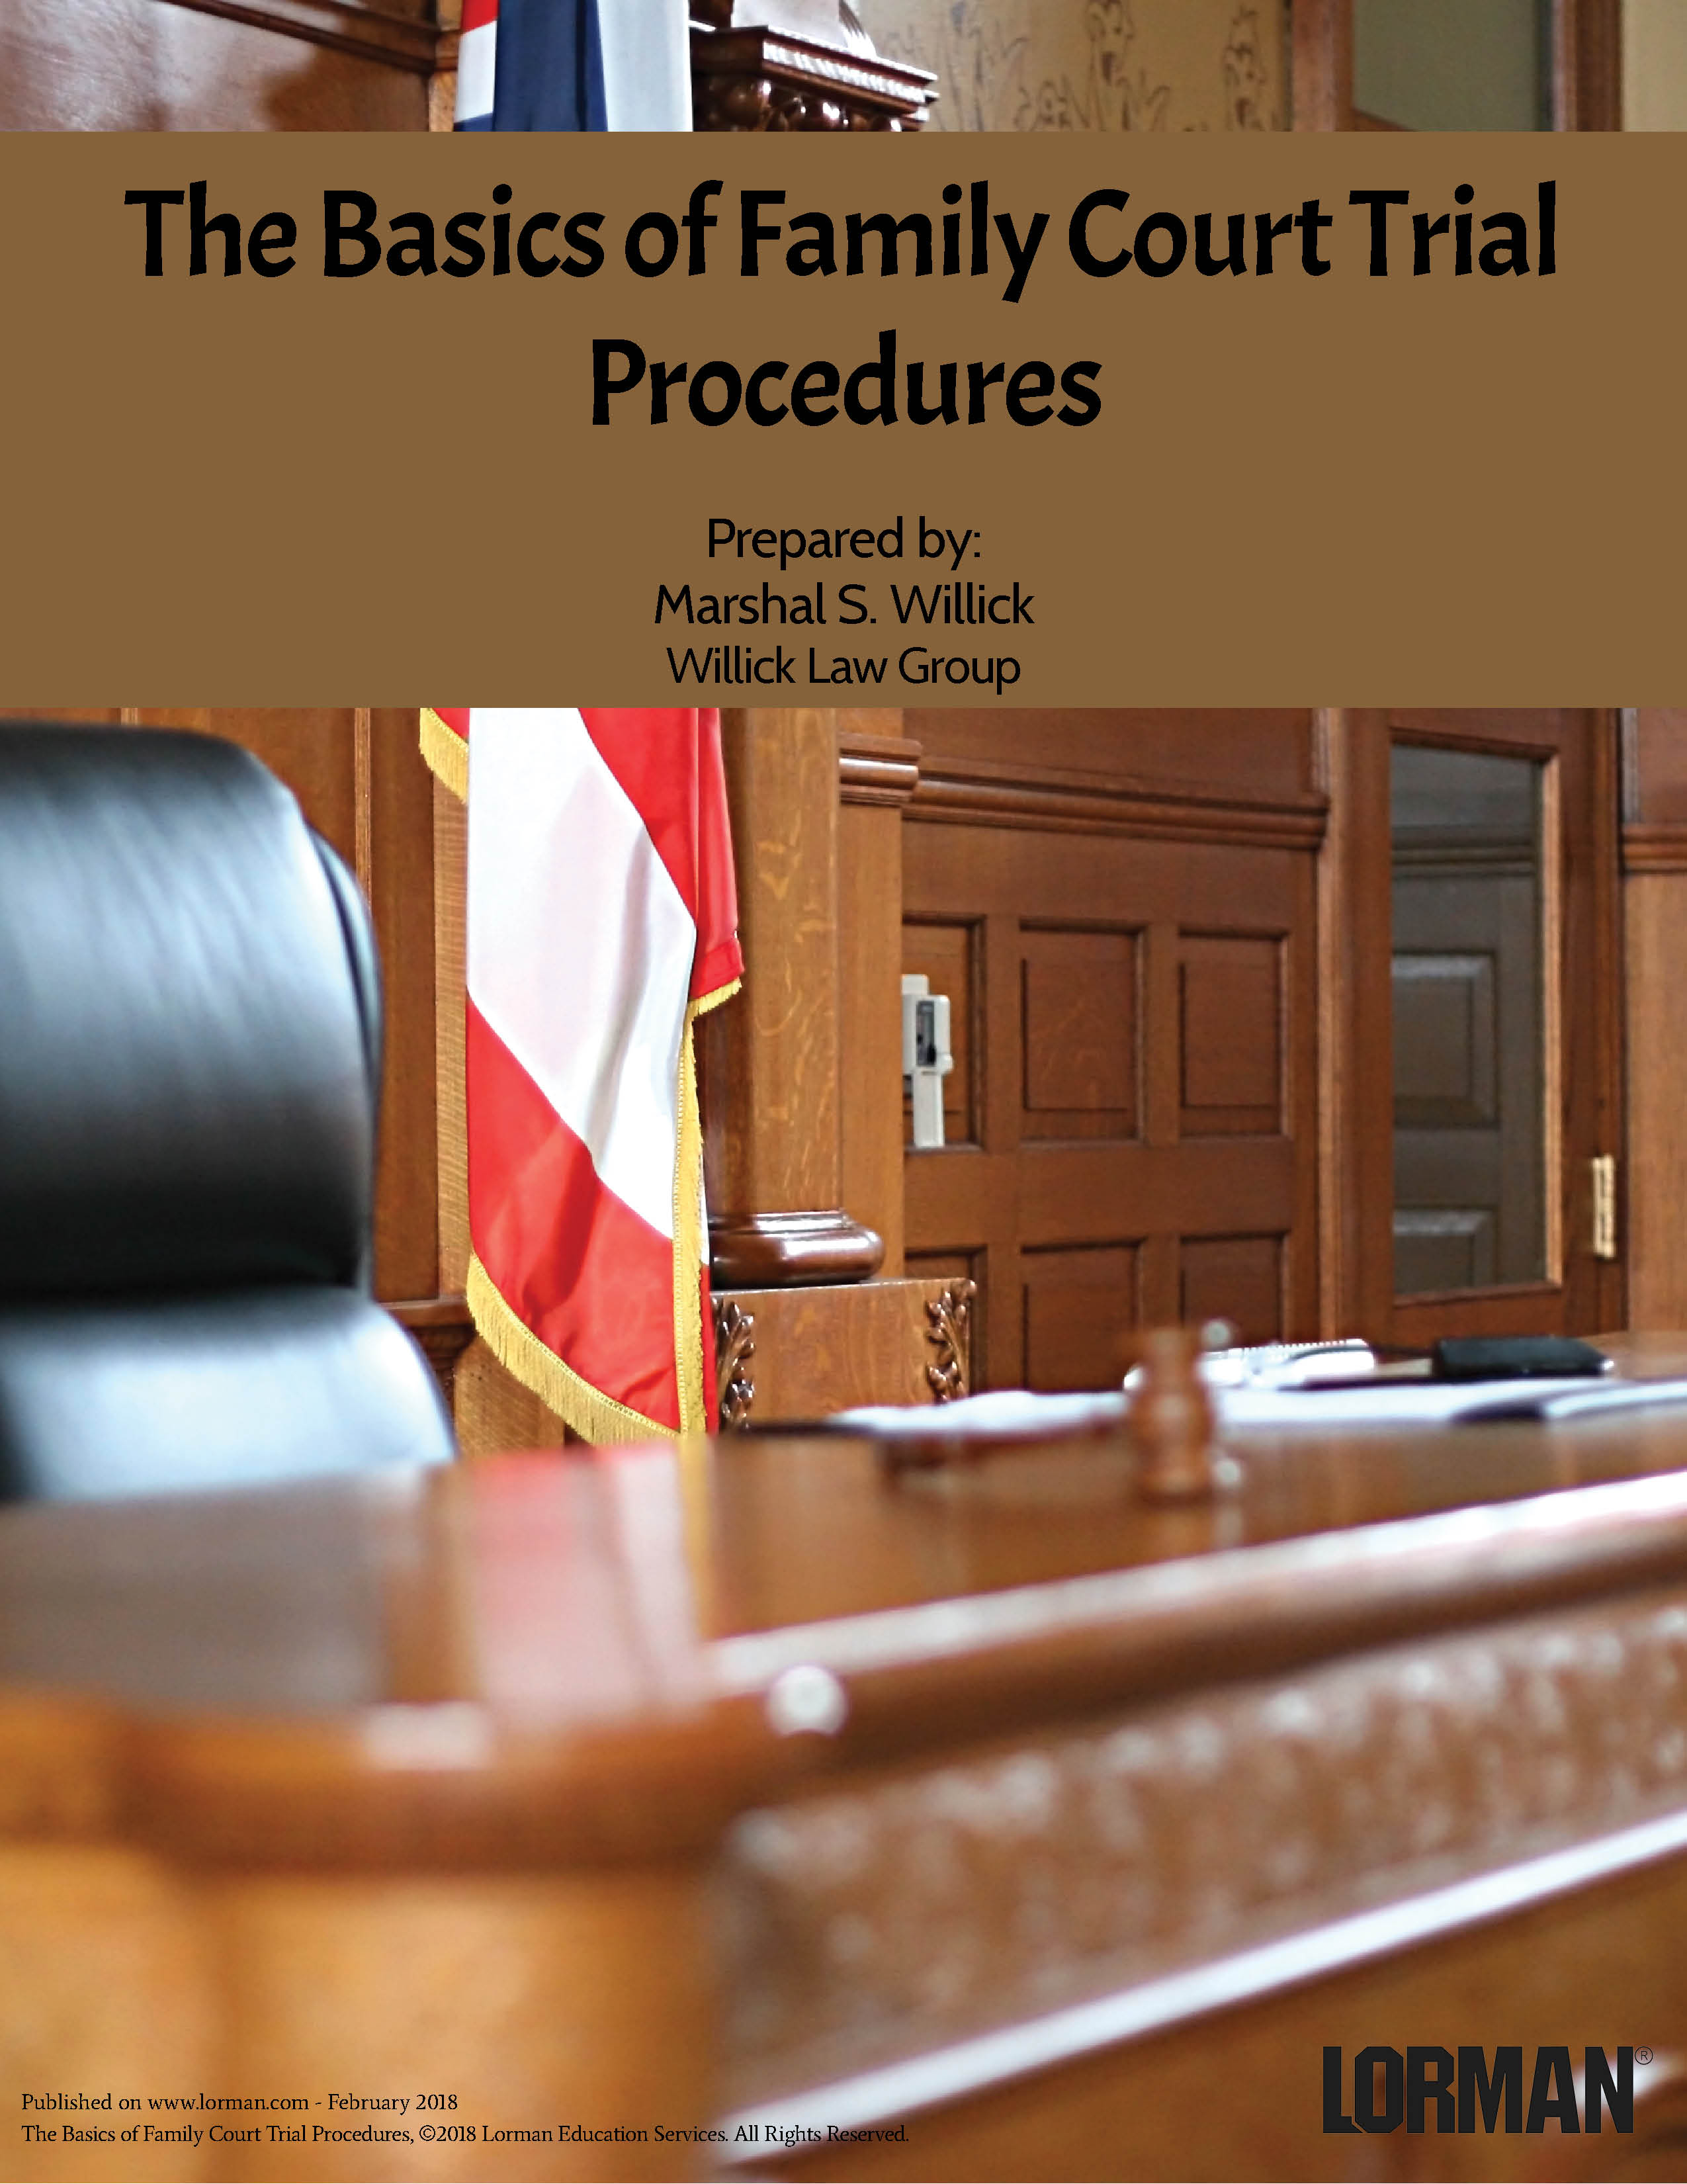 The Basics of Family Court Trial Procedures